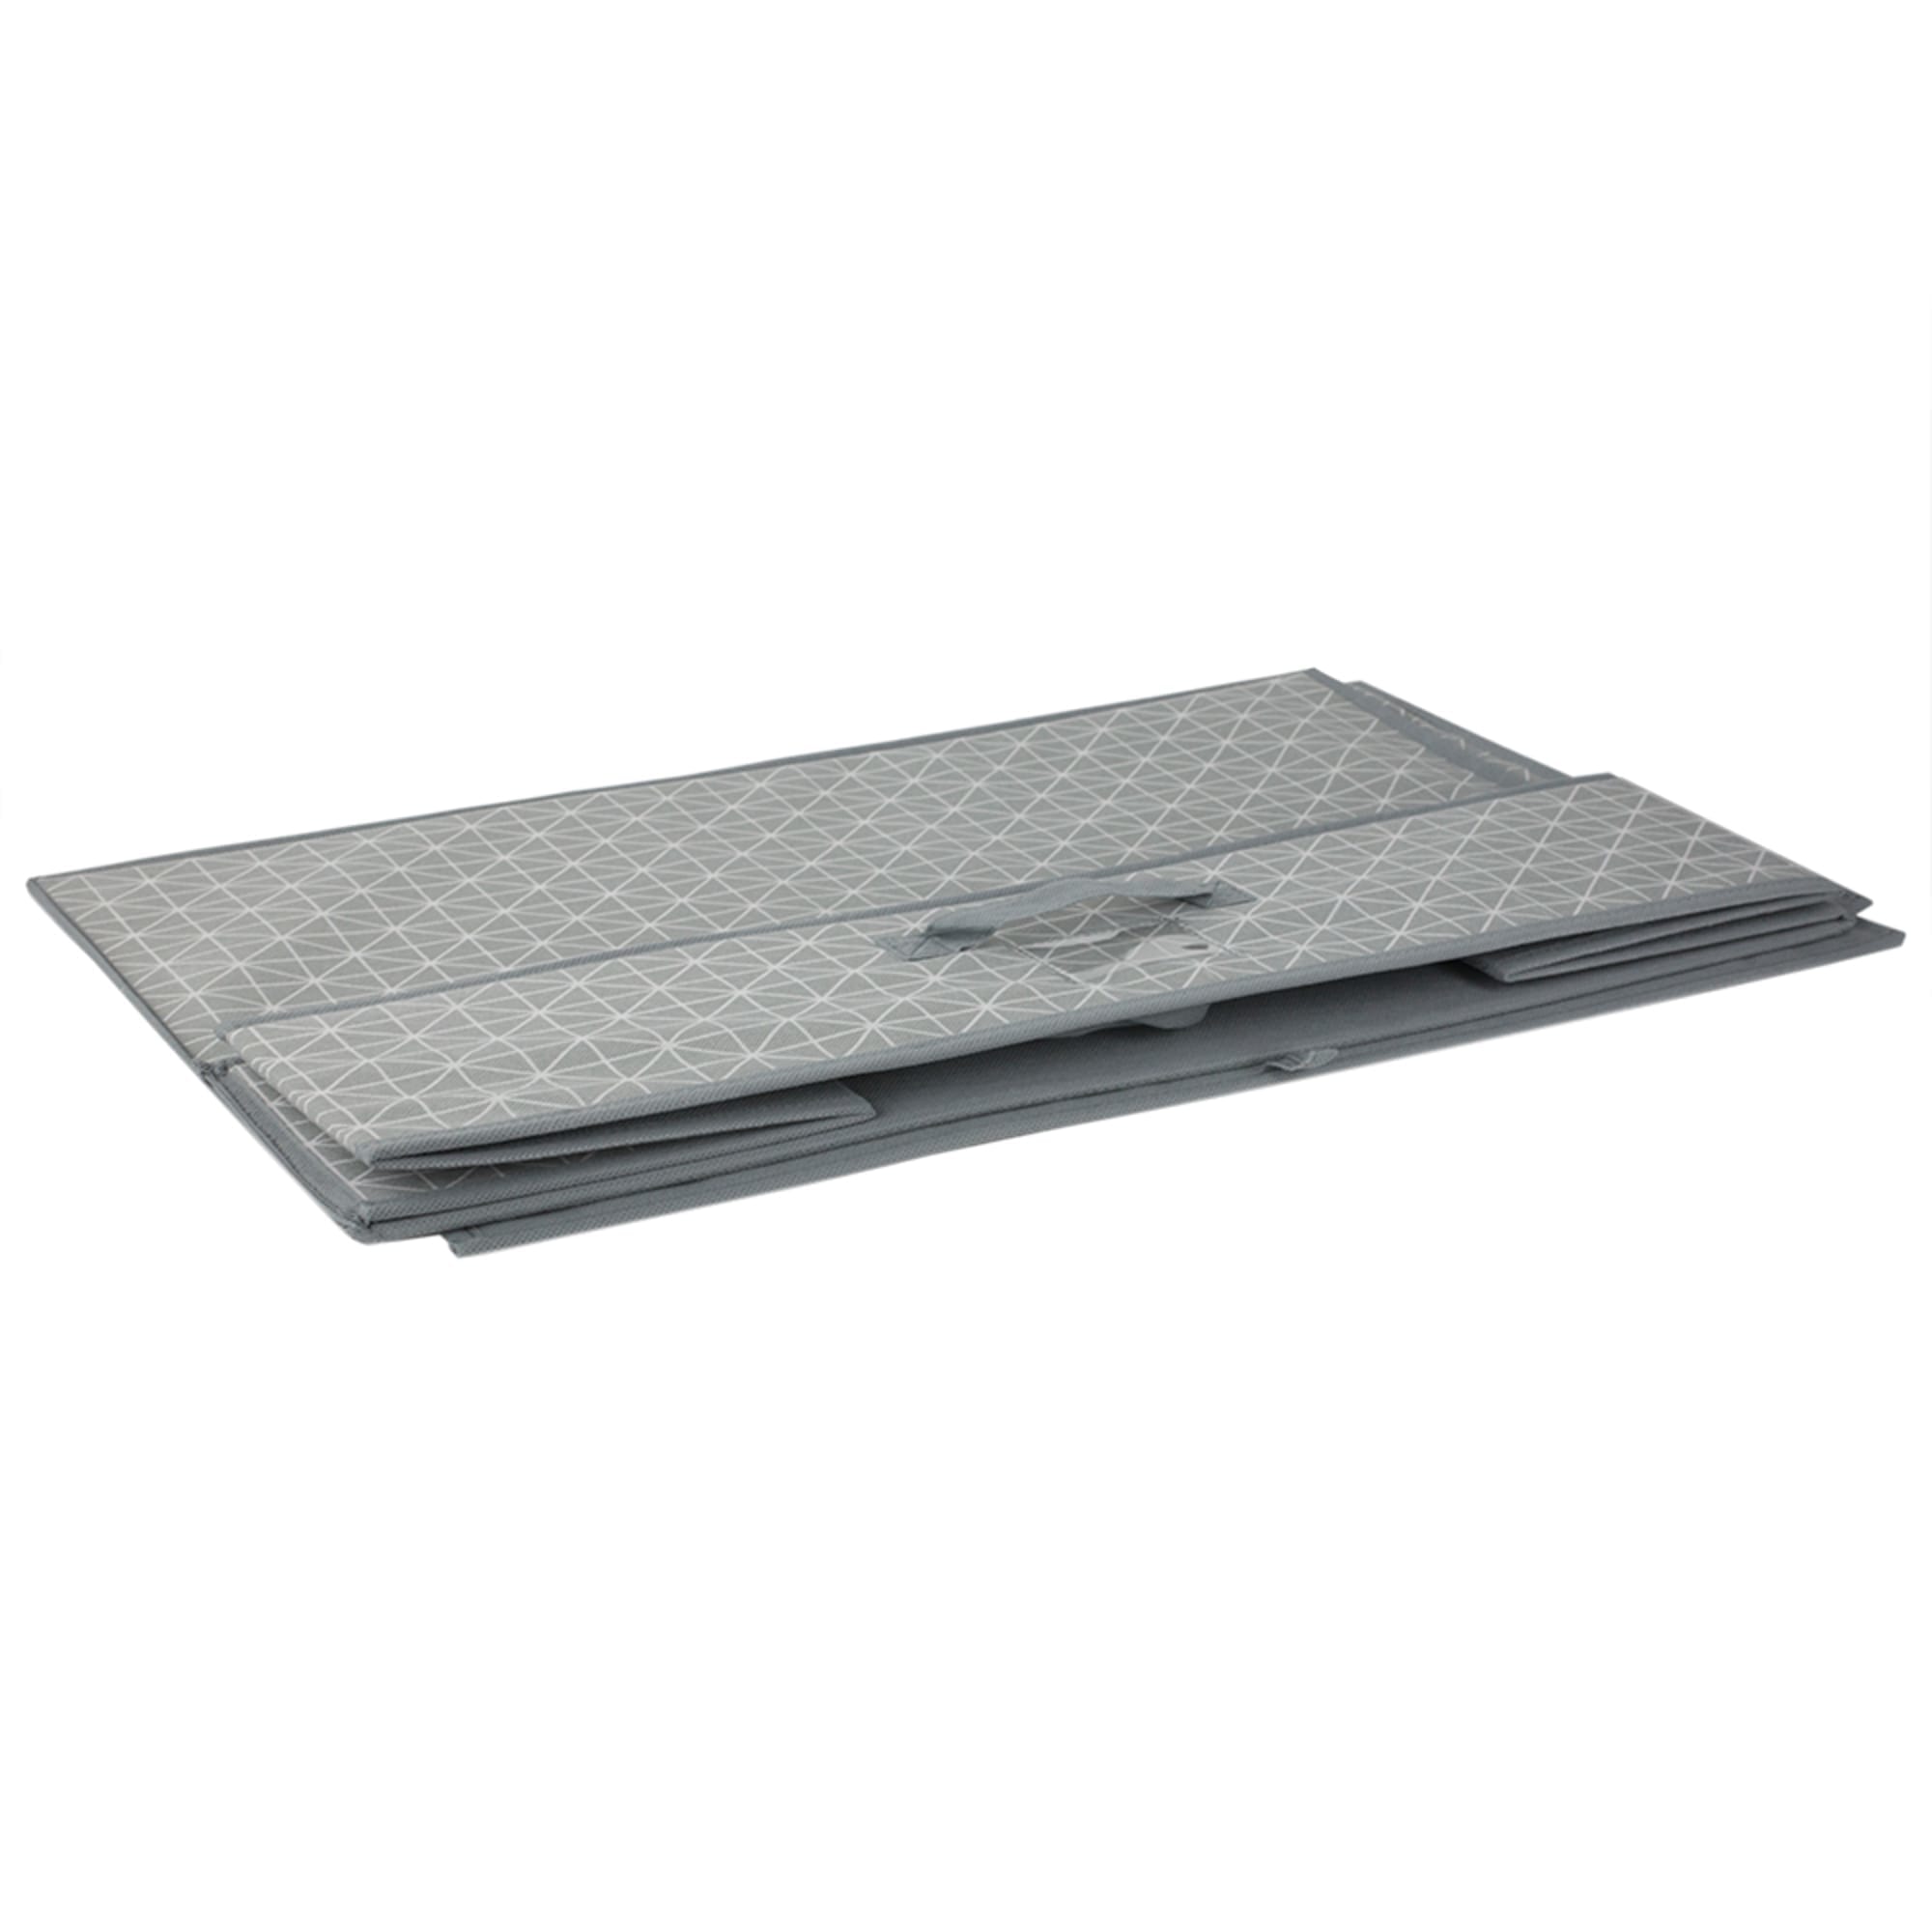 Home Basics Diamond Collection Under the Bed Storage Box, Grey $8.00 EACH, CASE PACK OF 12